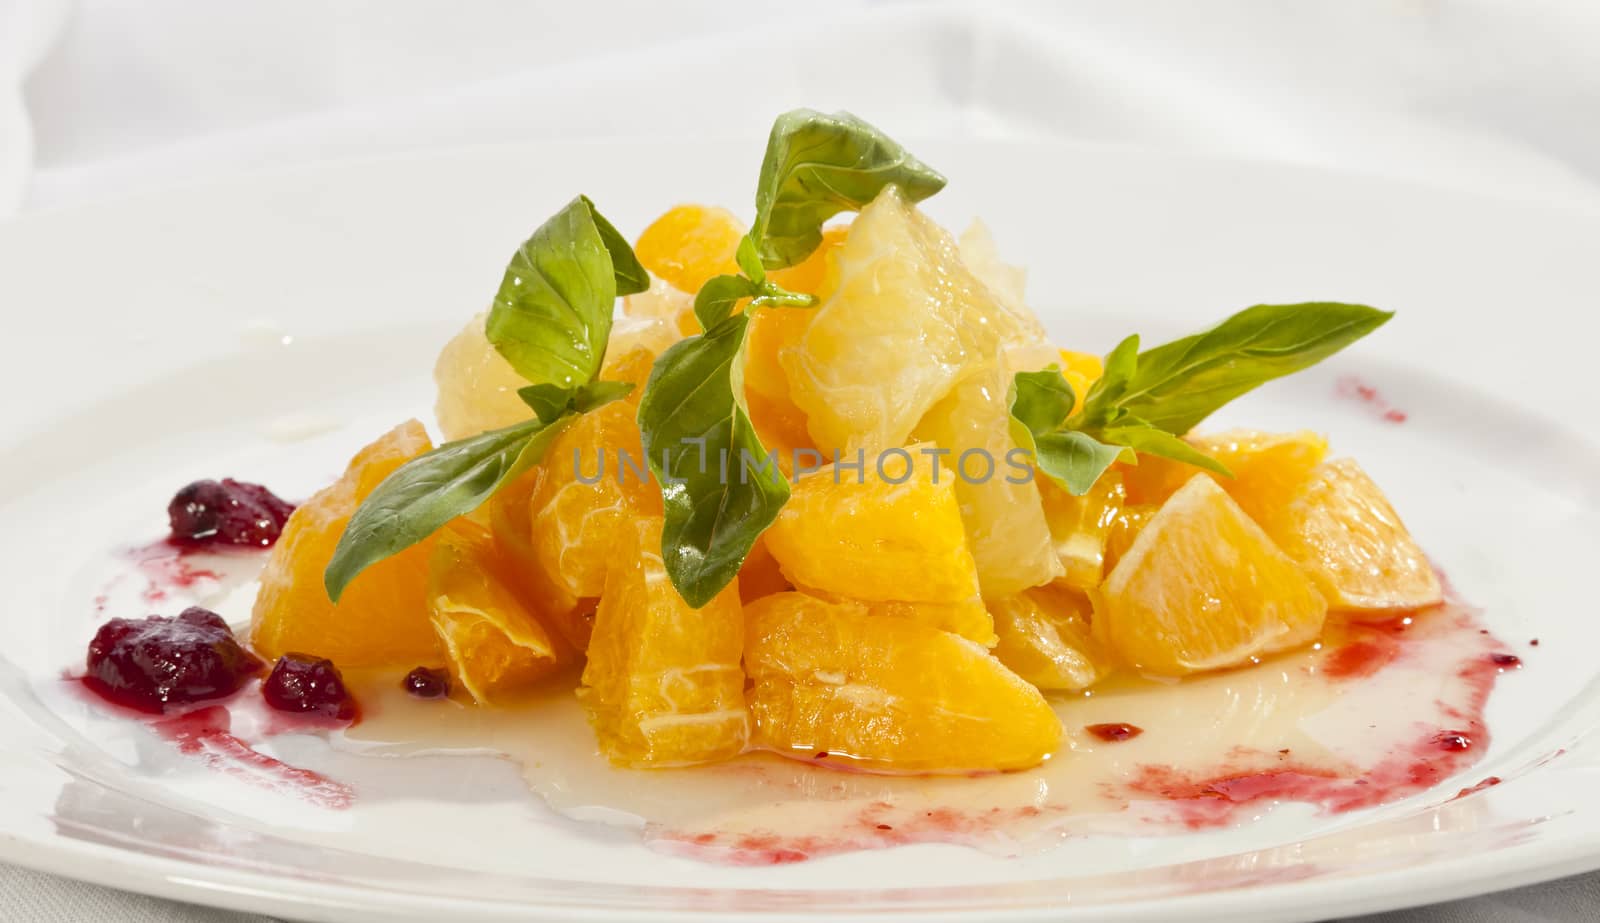 Fruit salad mixed from oranges and grapefruits